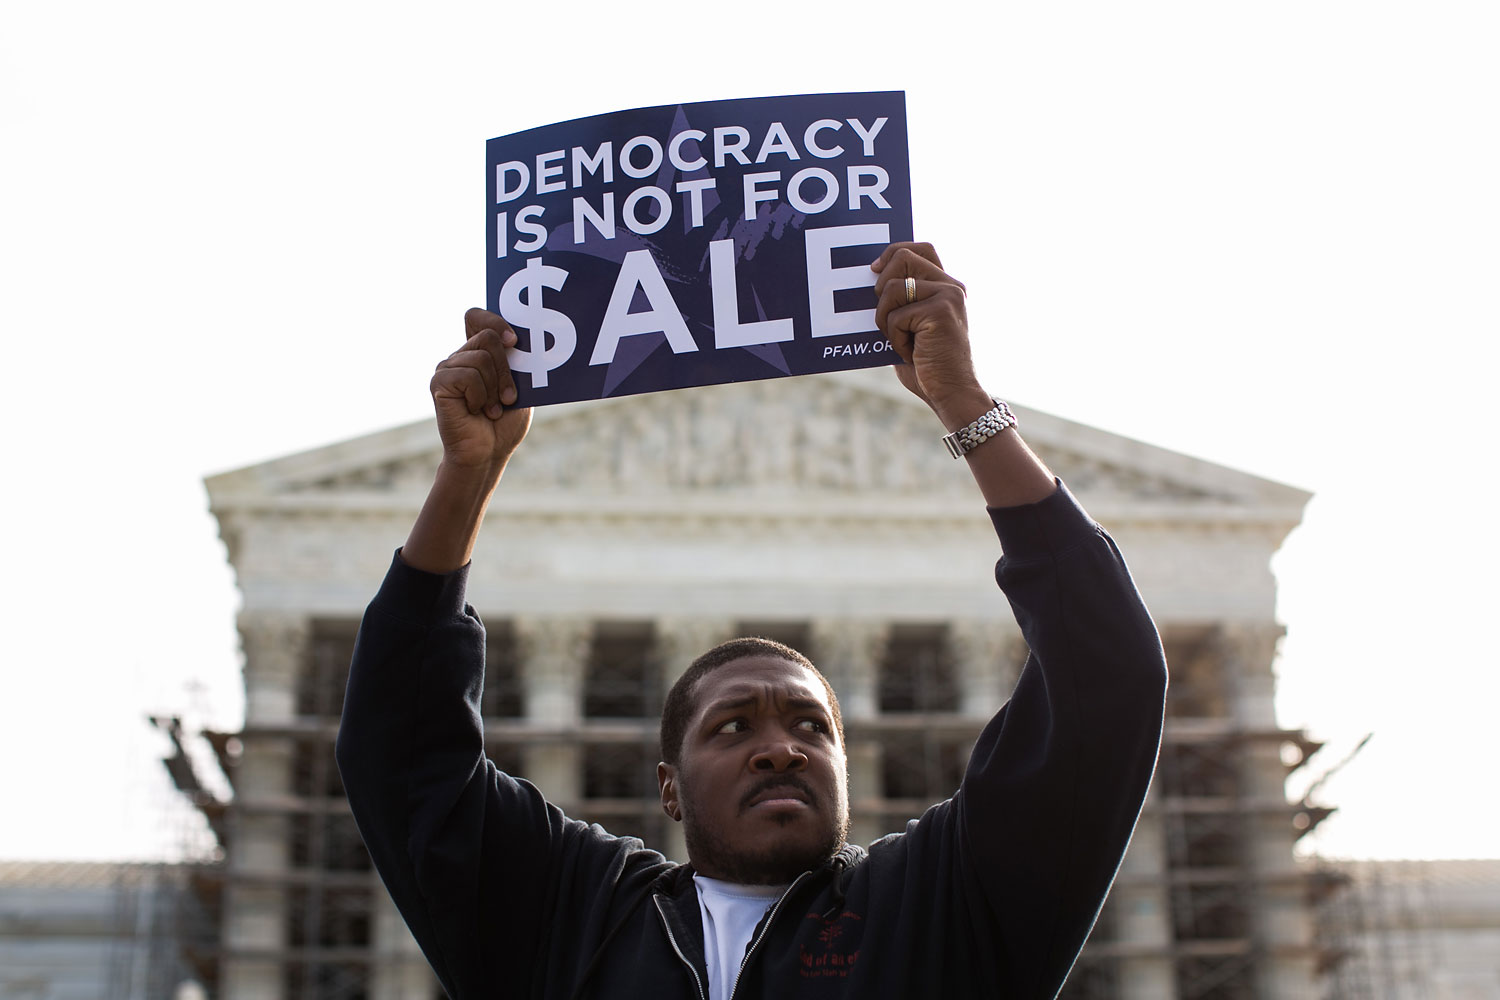 Cornell Woolridge holds a sign as he rallies against money in politics, at the Supreme Court in Washington, on October 8, 2013 in Washington, DC. (Drew Angerer—Getty Images)